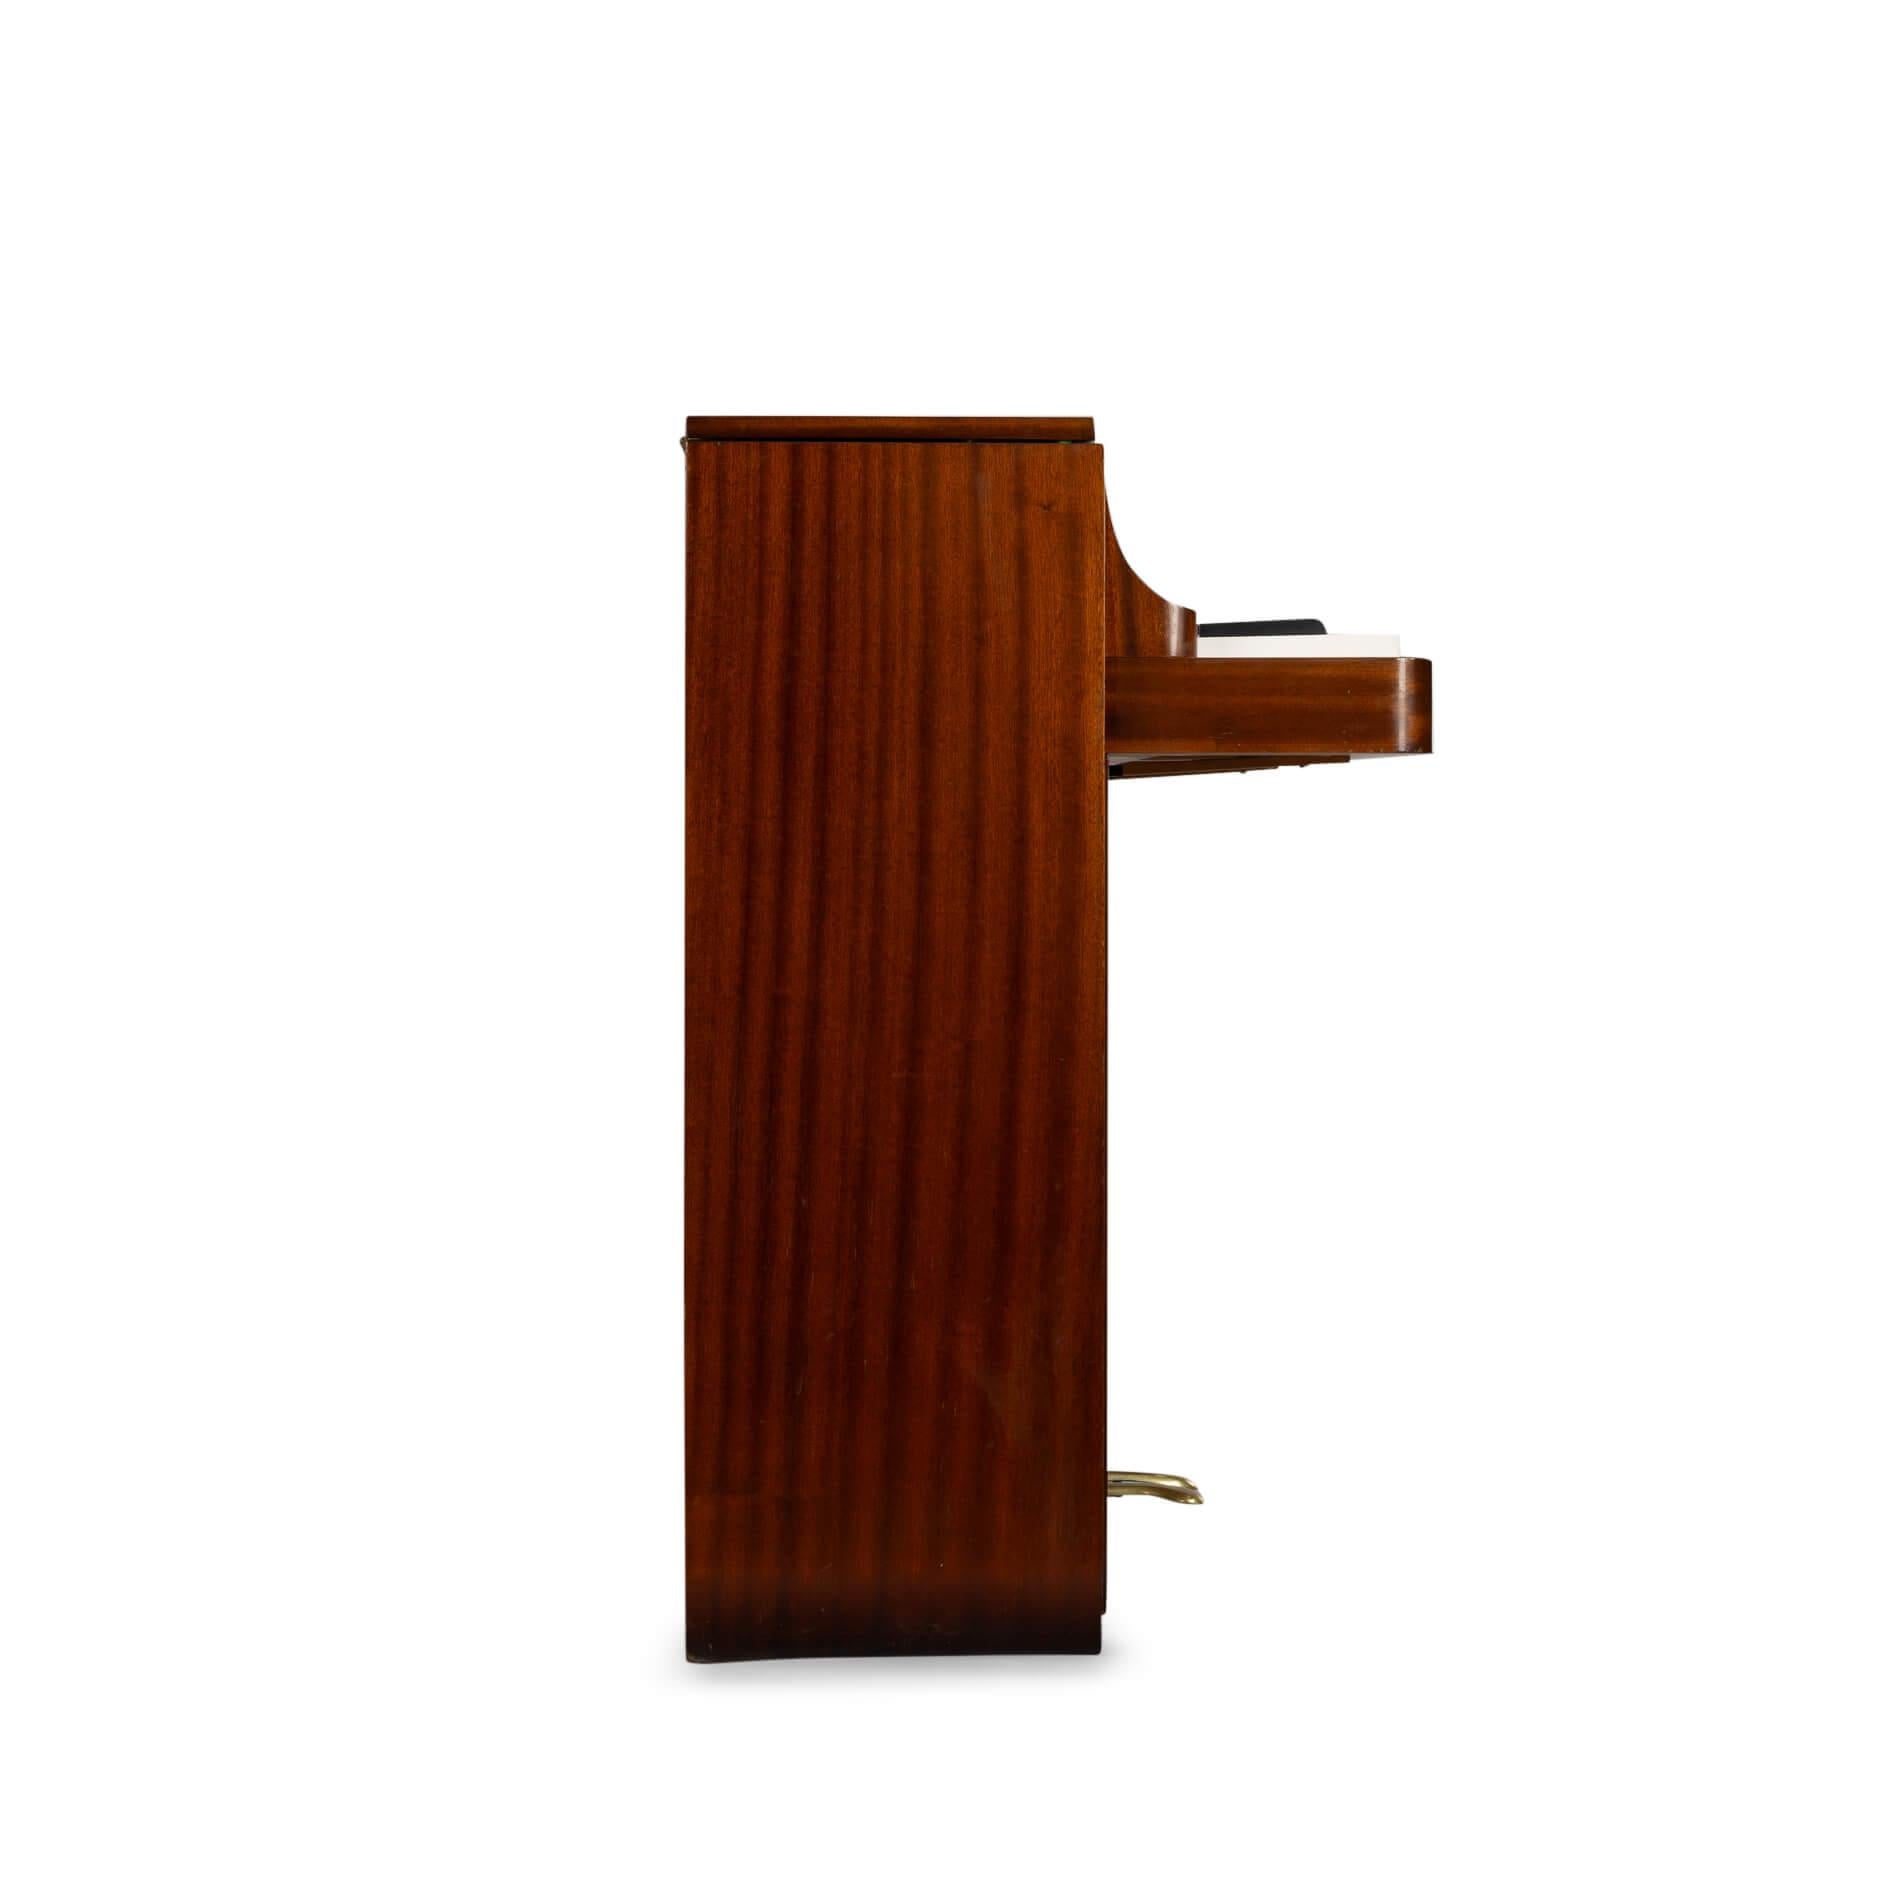 Mid-Century Modern Danish Design Midcentury Pianette by Louis Zwicki in Mahogany, 1950s For Sale